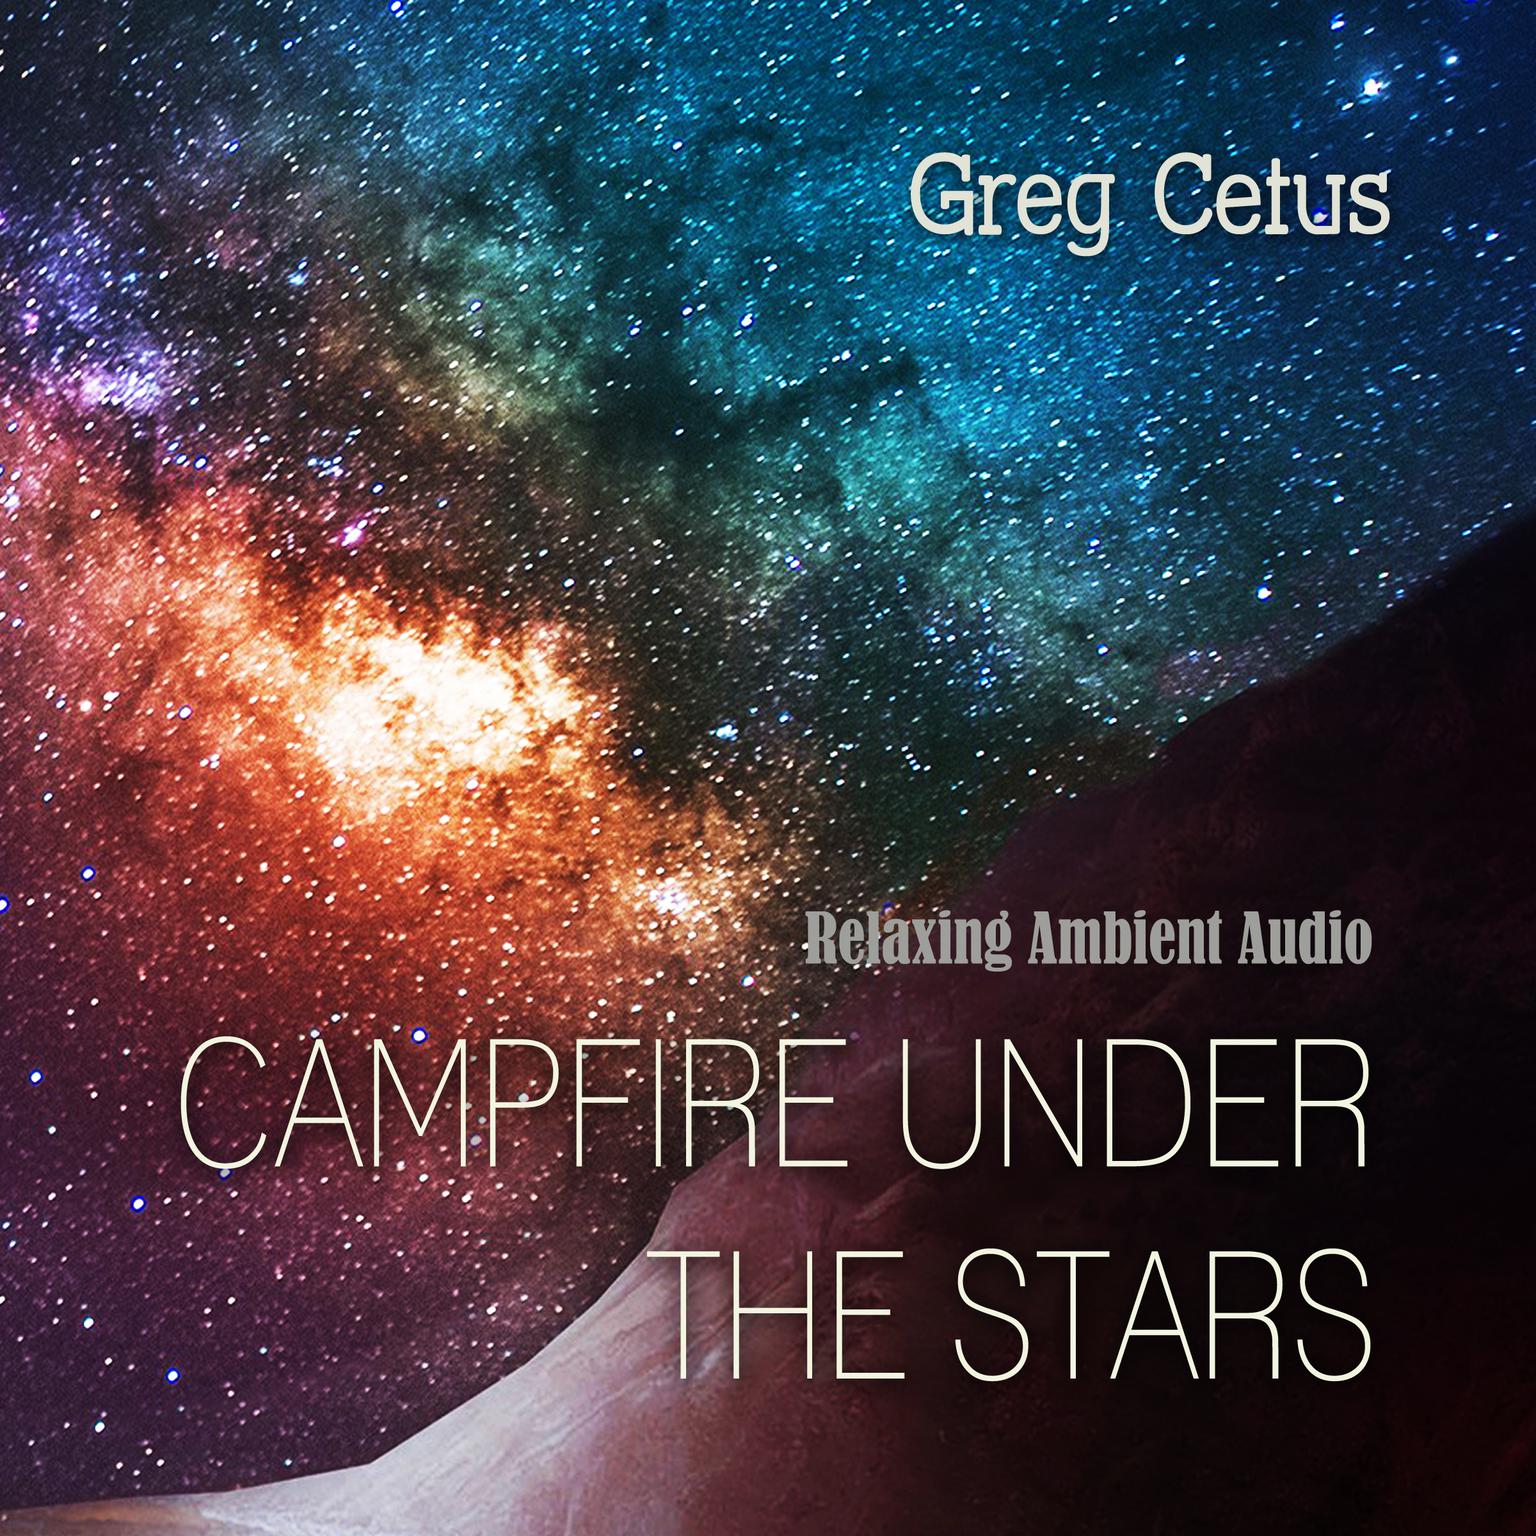 Campfire Under The Stars: Relaxing Ambient Audio Audiobook, by Greg Cetus